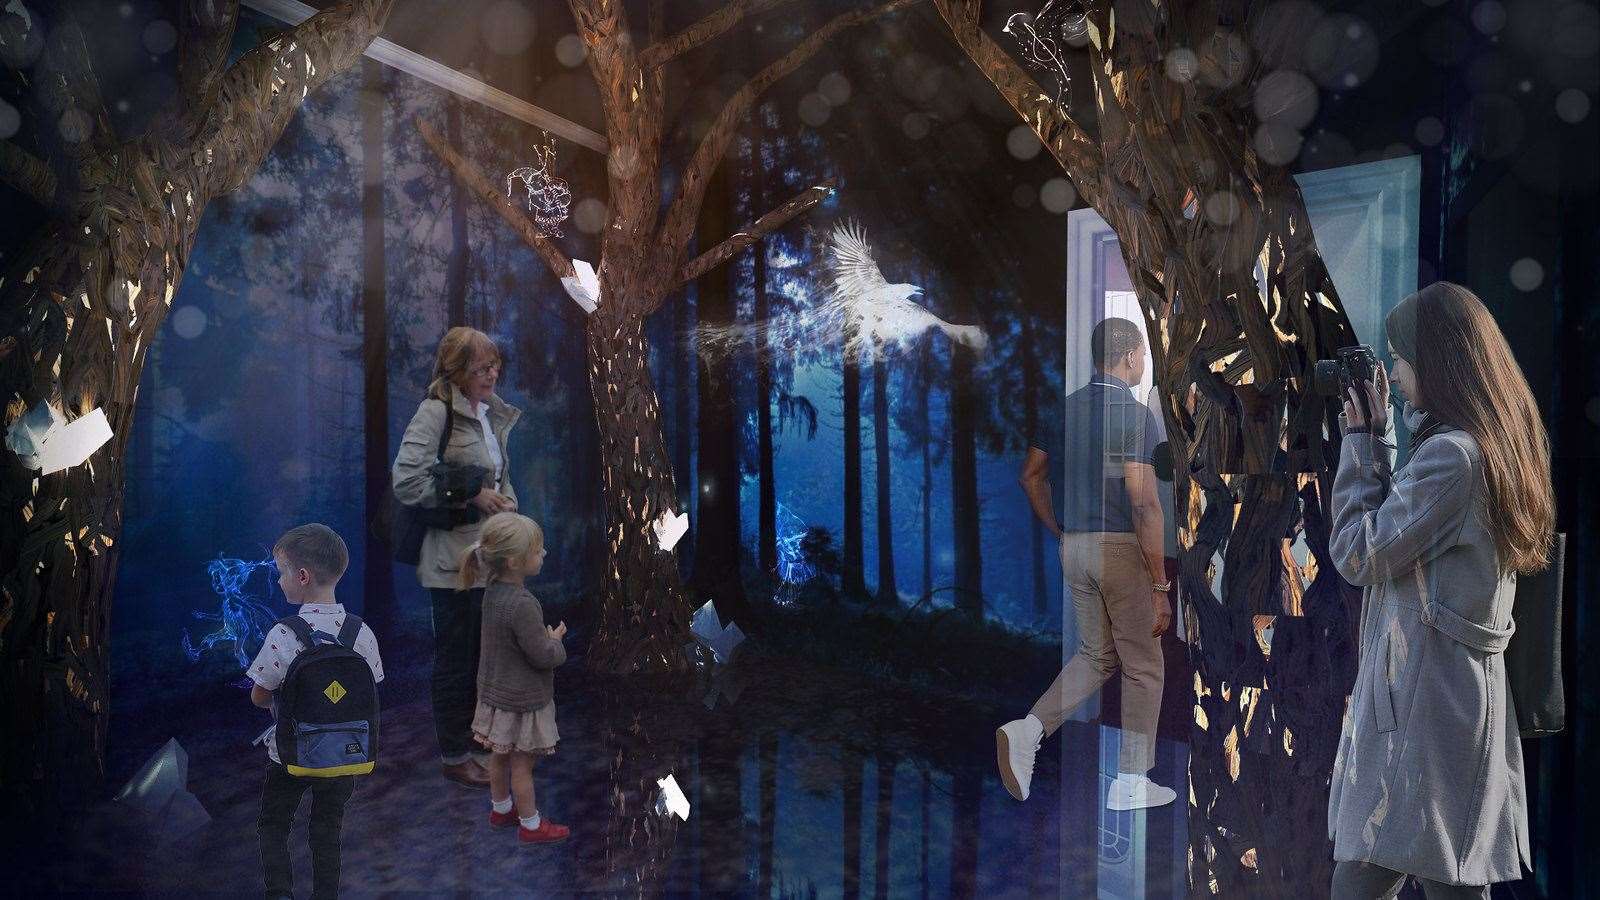 Visitors are invited to engage with the trees to discover and reveal stories within in the Landscape Forest Room (Cruth-tìre).